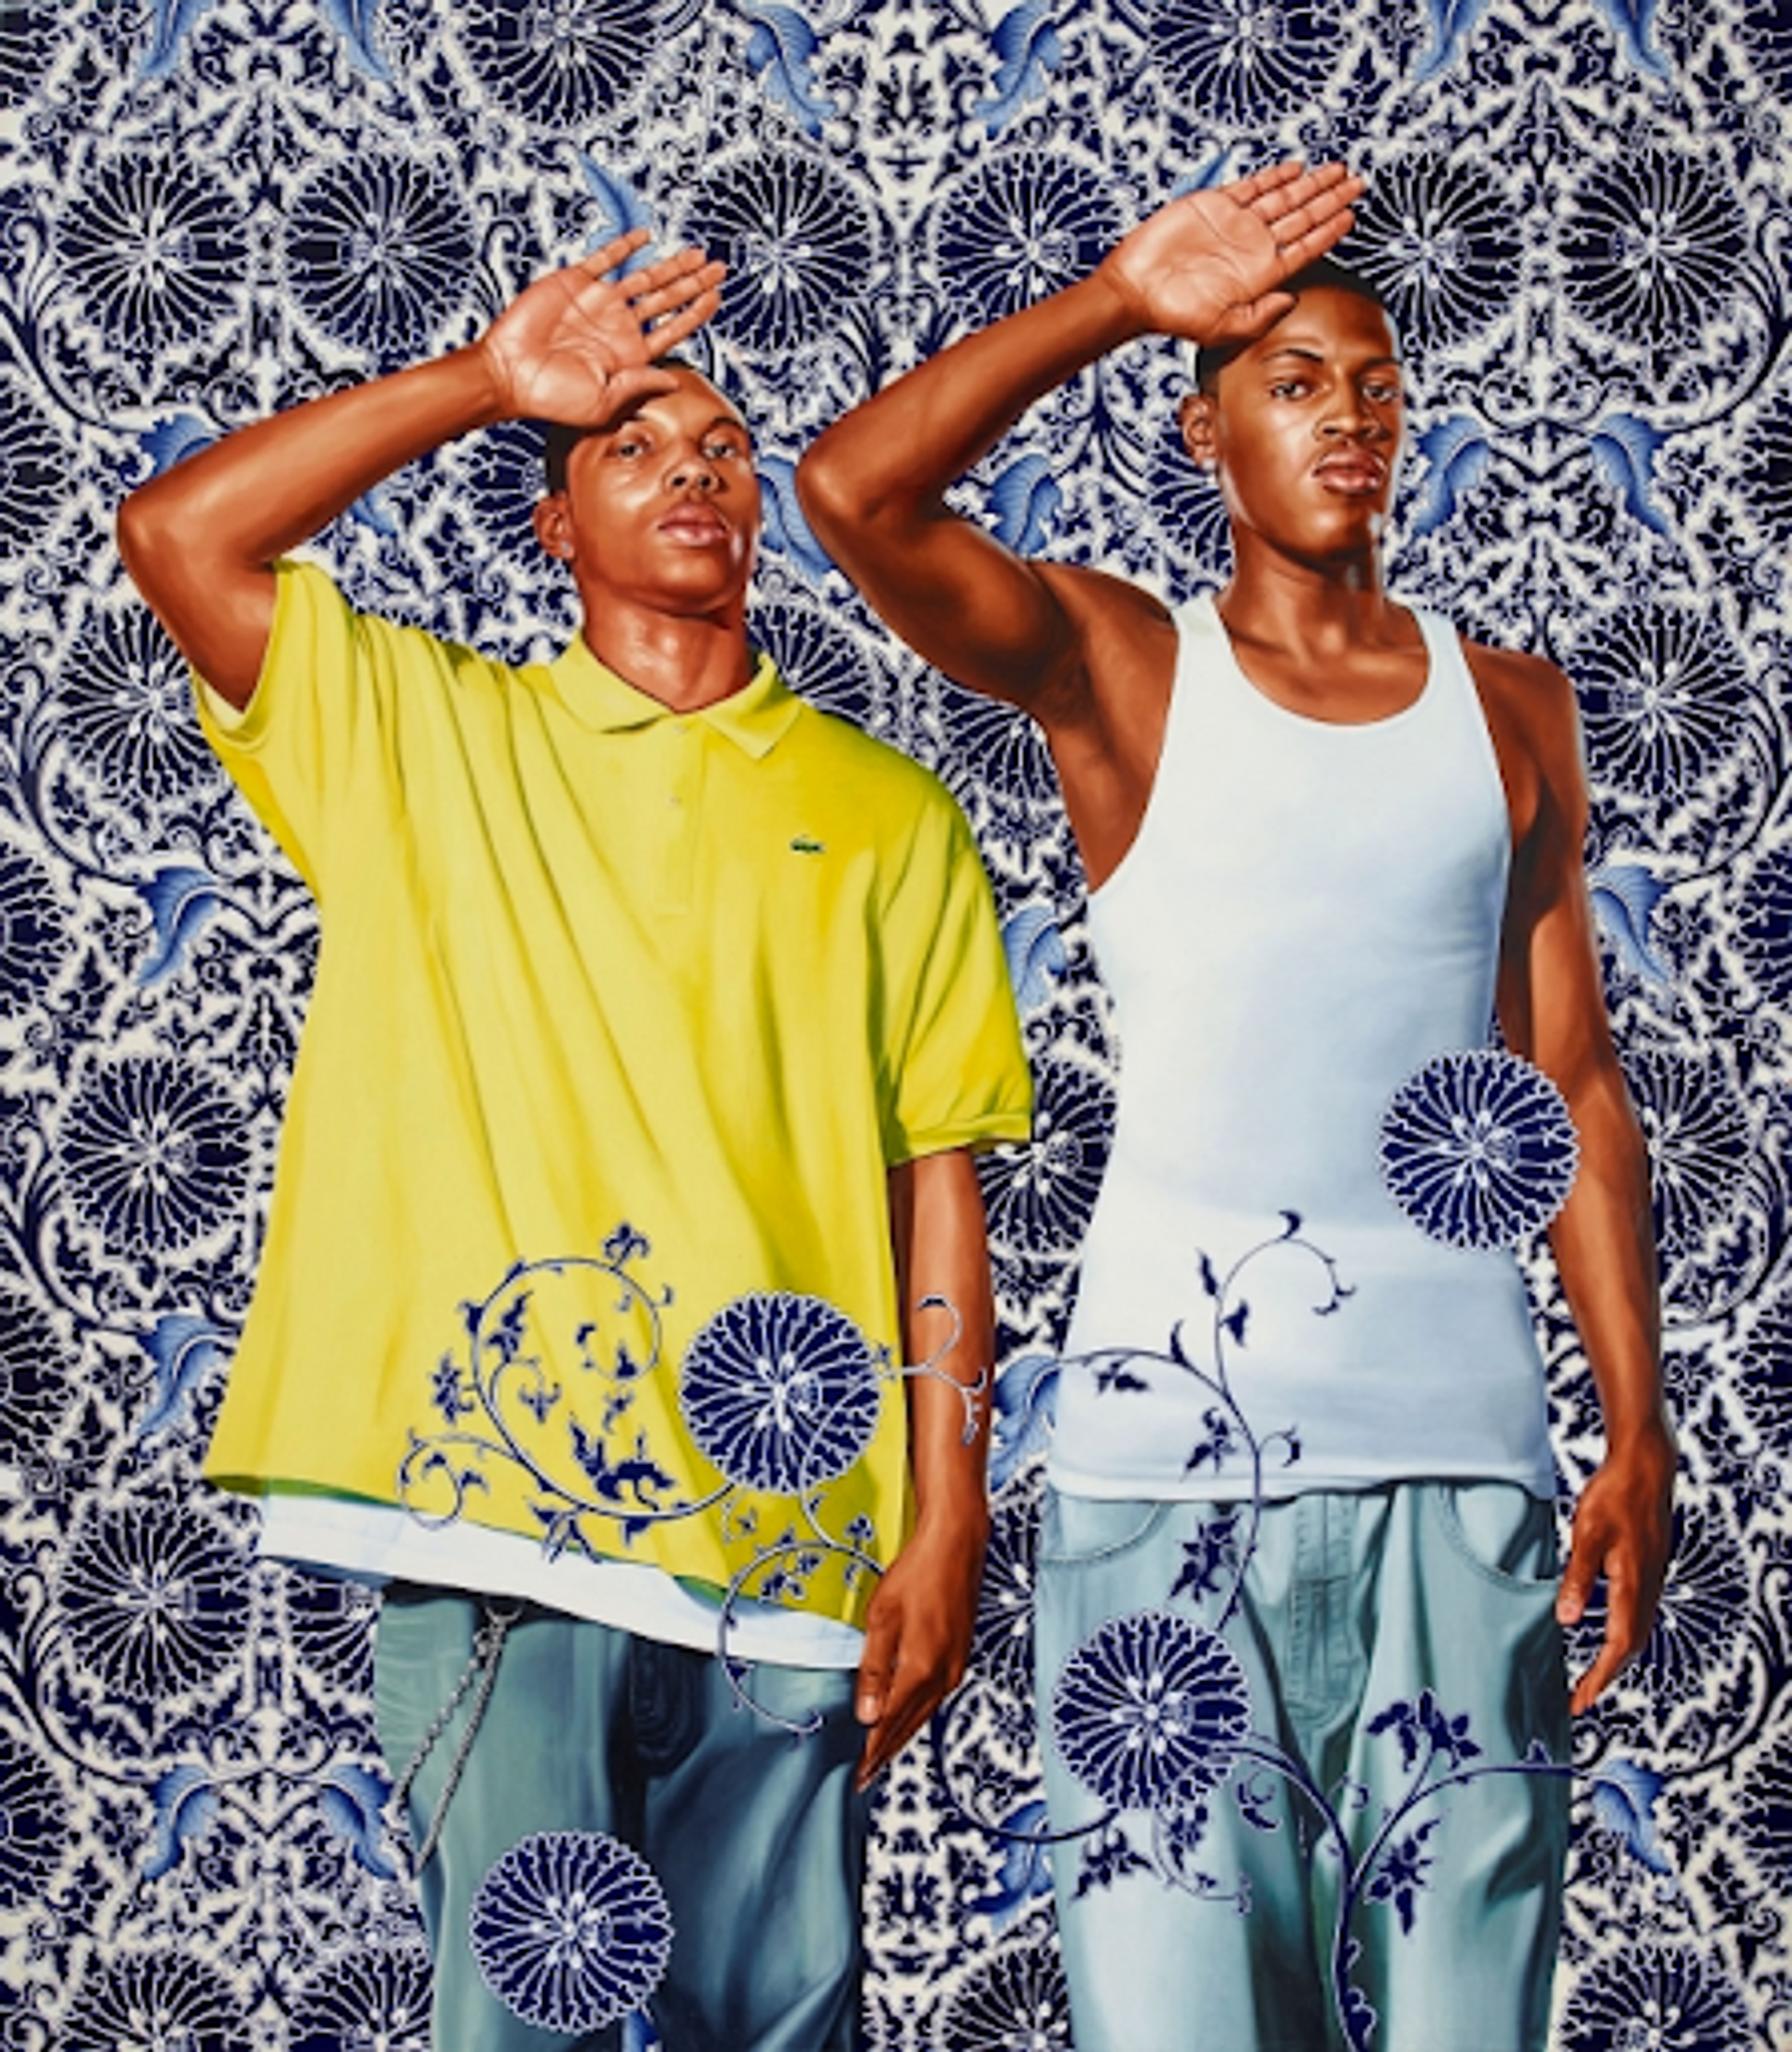 Kehinde Wiley’s Two Heroic Sisters of the Grassland. Two black men standing beside one another with one hand raised open on their forehead, and the other hand on the side of their bodies. One wears a yellow shirt, the other  white tank top in front of an ornate blue patterned background. 